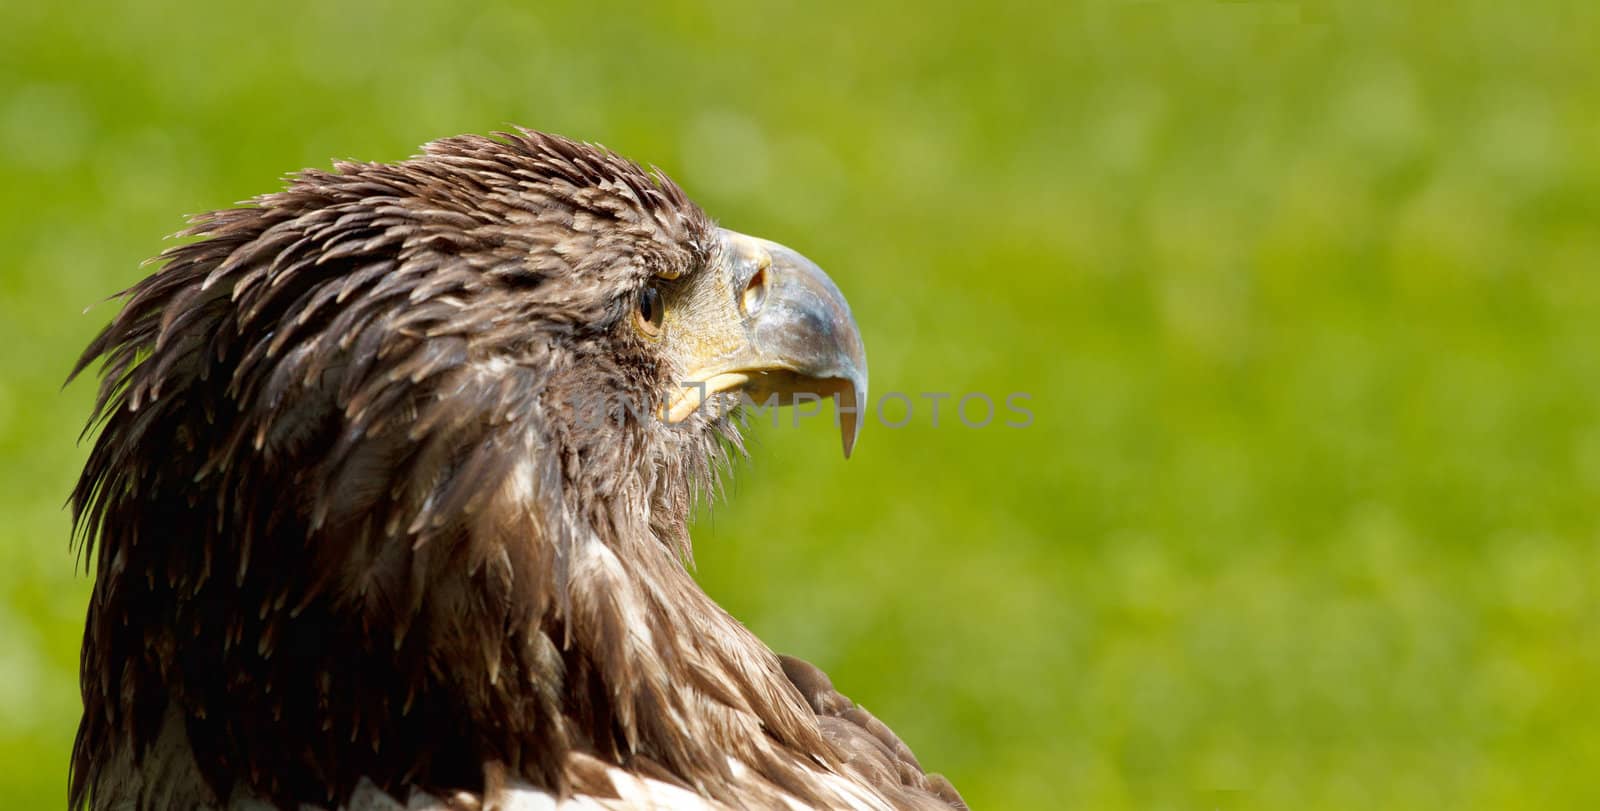 Big Sea Eagle (Haliaeetus albicill) looking for prey with space for text